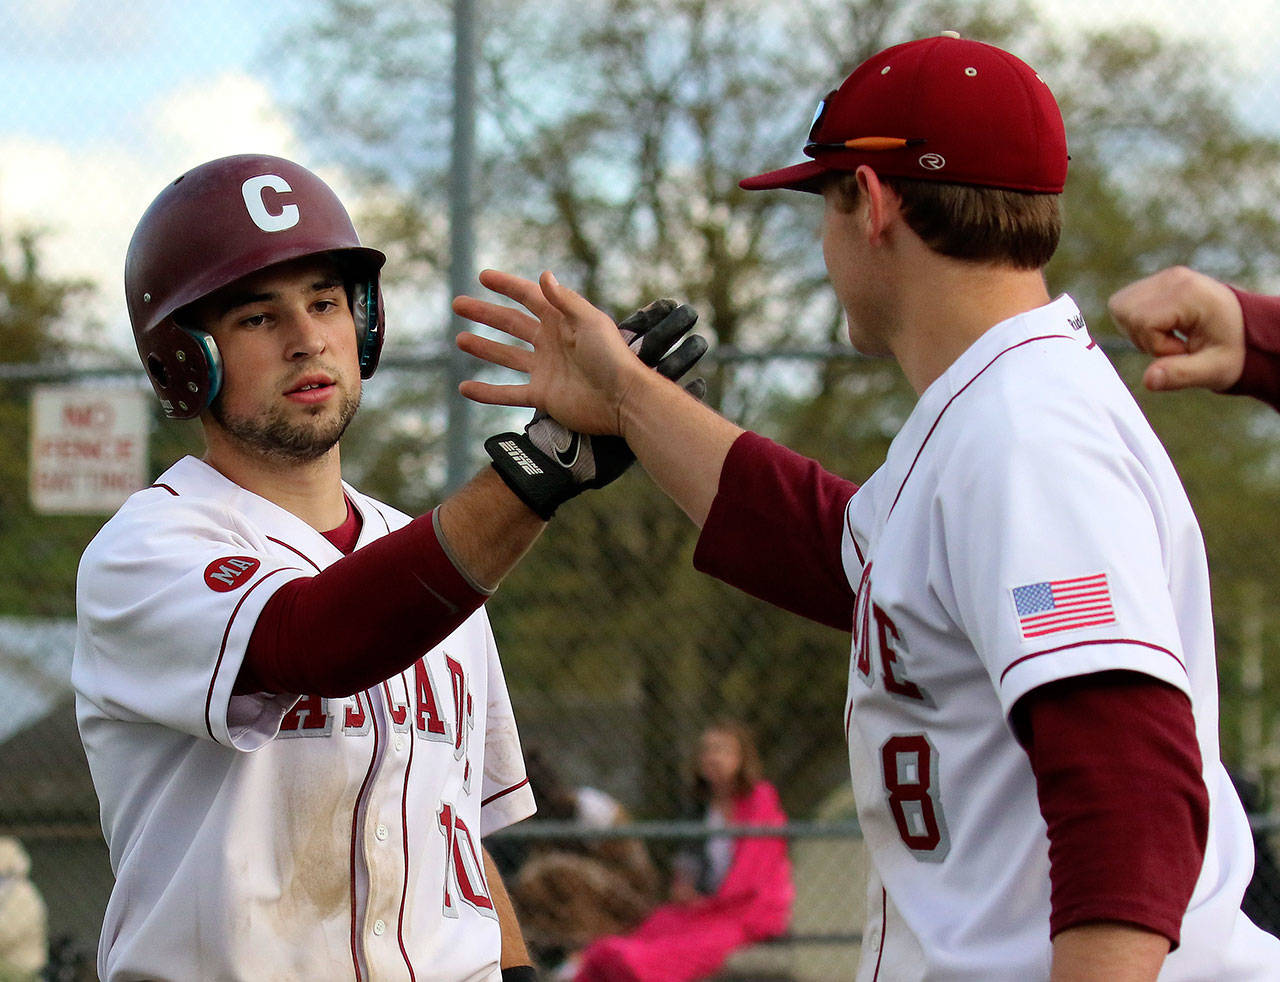 Cascade High School baseball player Austin Pinorini, left, is congratulated by Michael Carter for a score against Lake Stevens on April 29, 2015, in Everett. On Wednesday, he was selected 670th overall by the Cleveland Indians in the Major League Baseball draft. (Kevin Clark / The Herald)